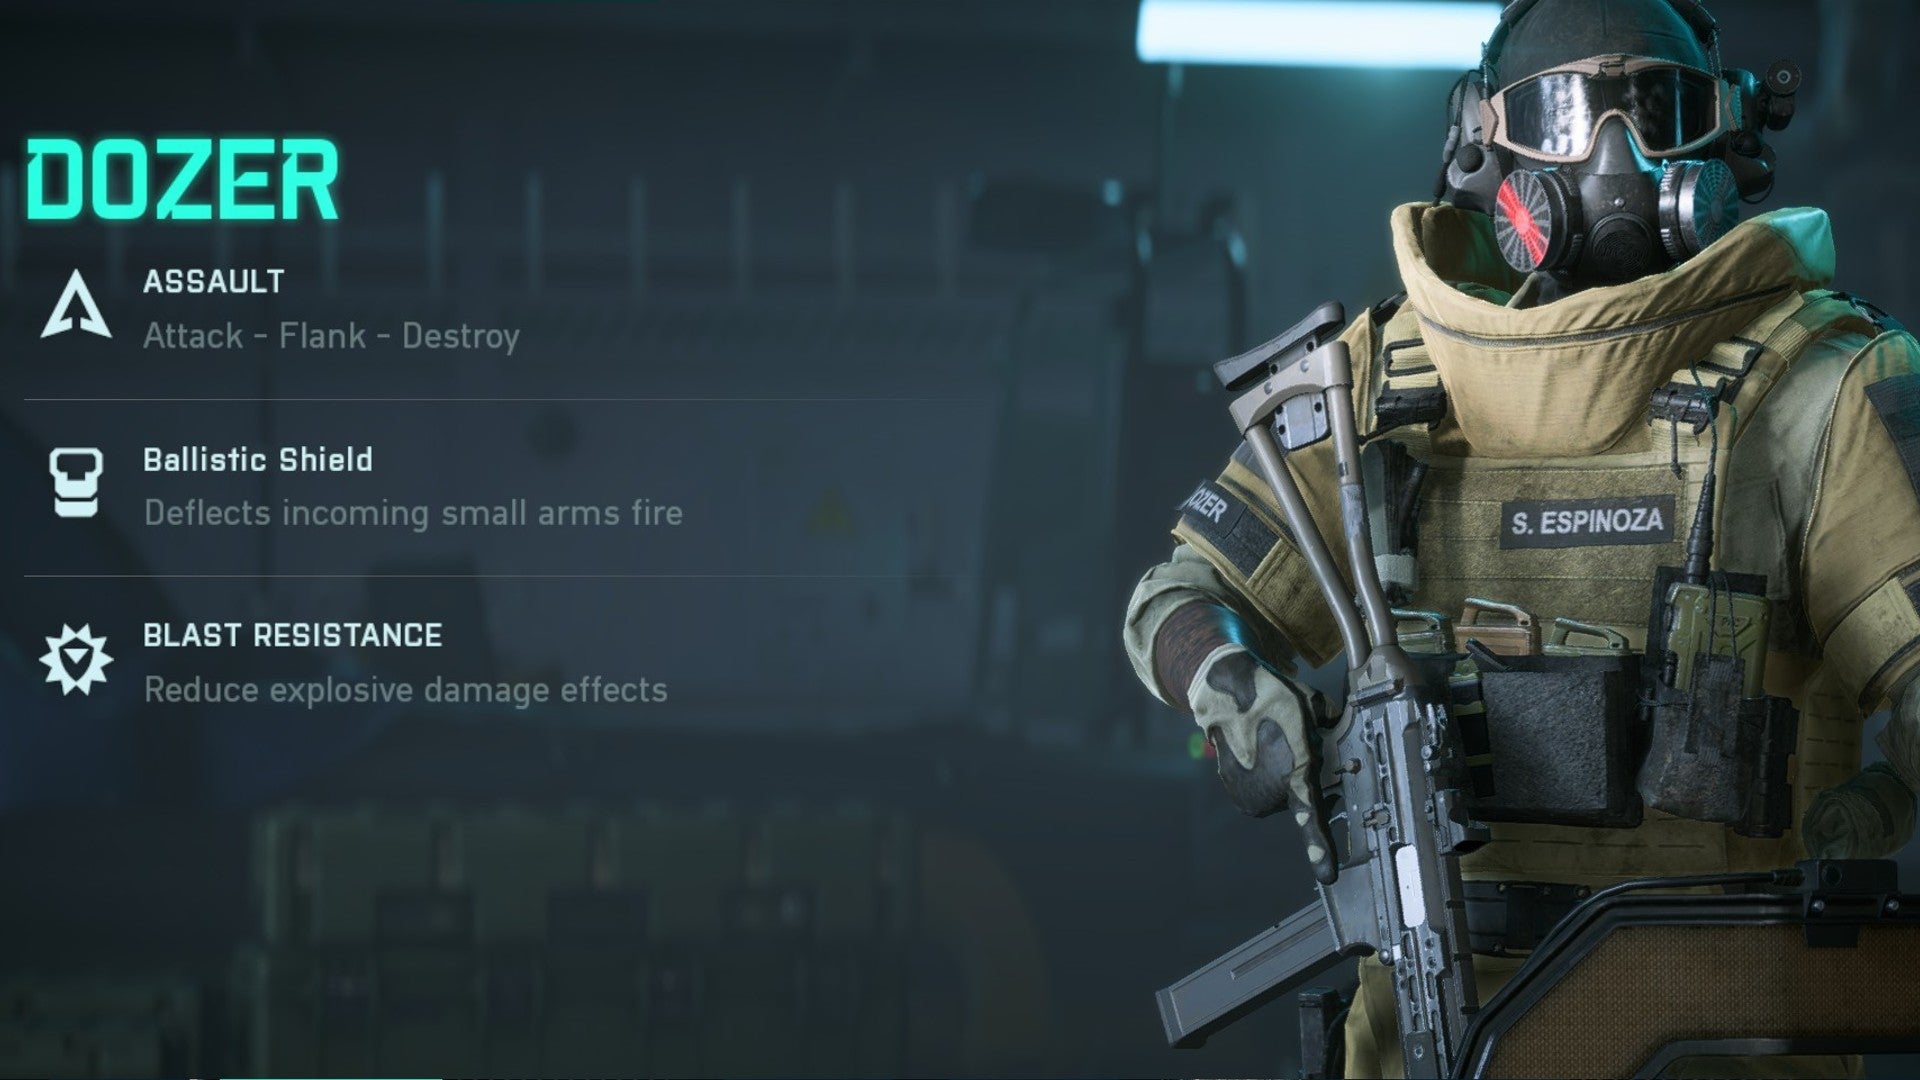 Dozer stood holding an SMG in the specialist selection menu. Text on the left describes their abilities.